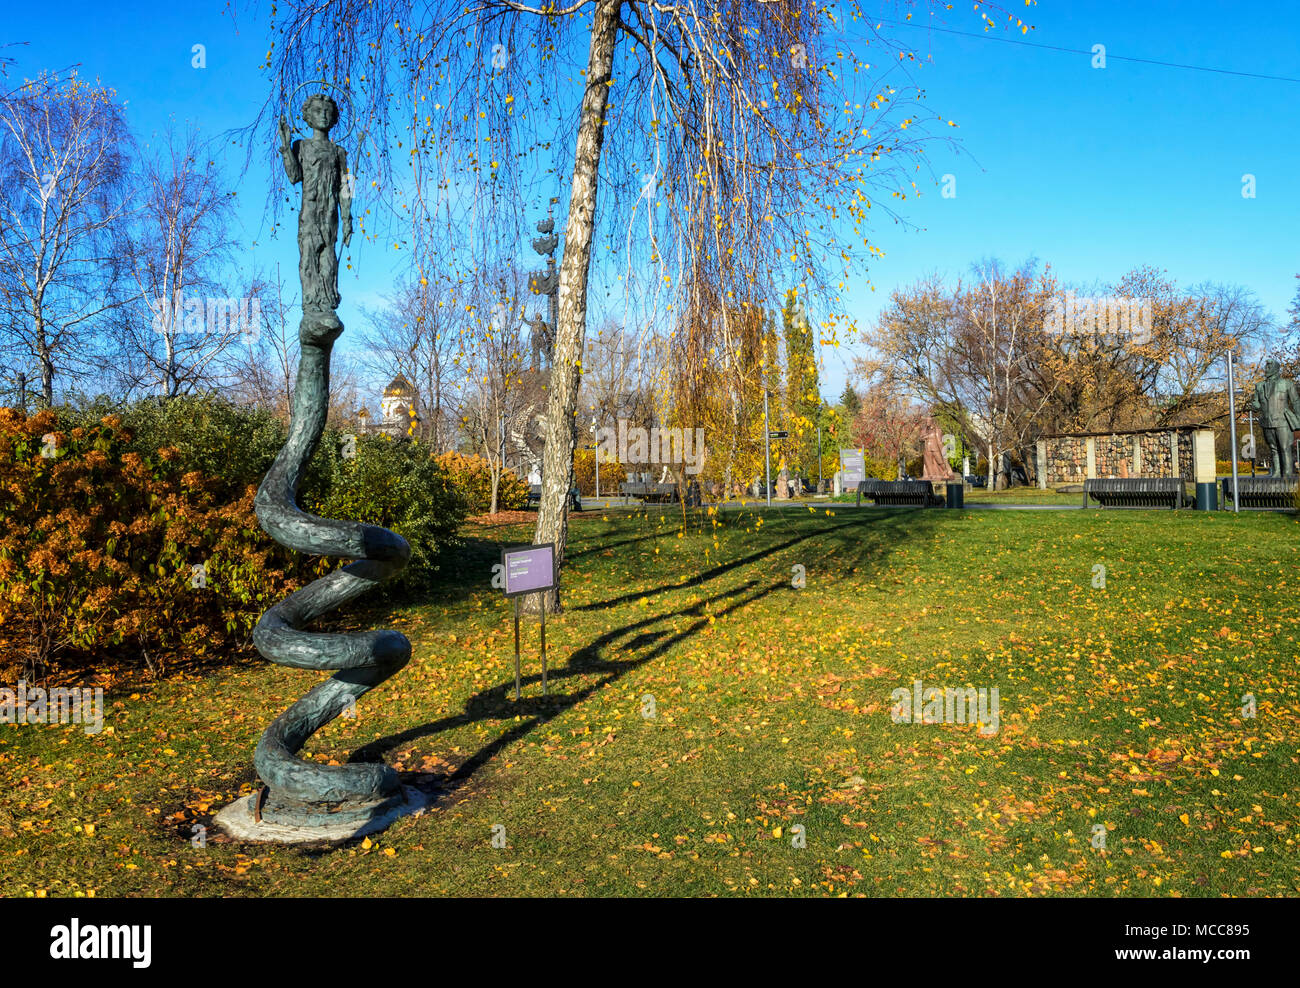 MOSCOW, RUSSIA - CIRCA OCTOBER 2017: MUZEON park of arts (formerly called Park of the Fallen Heroes) Stock Photo